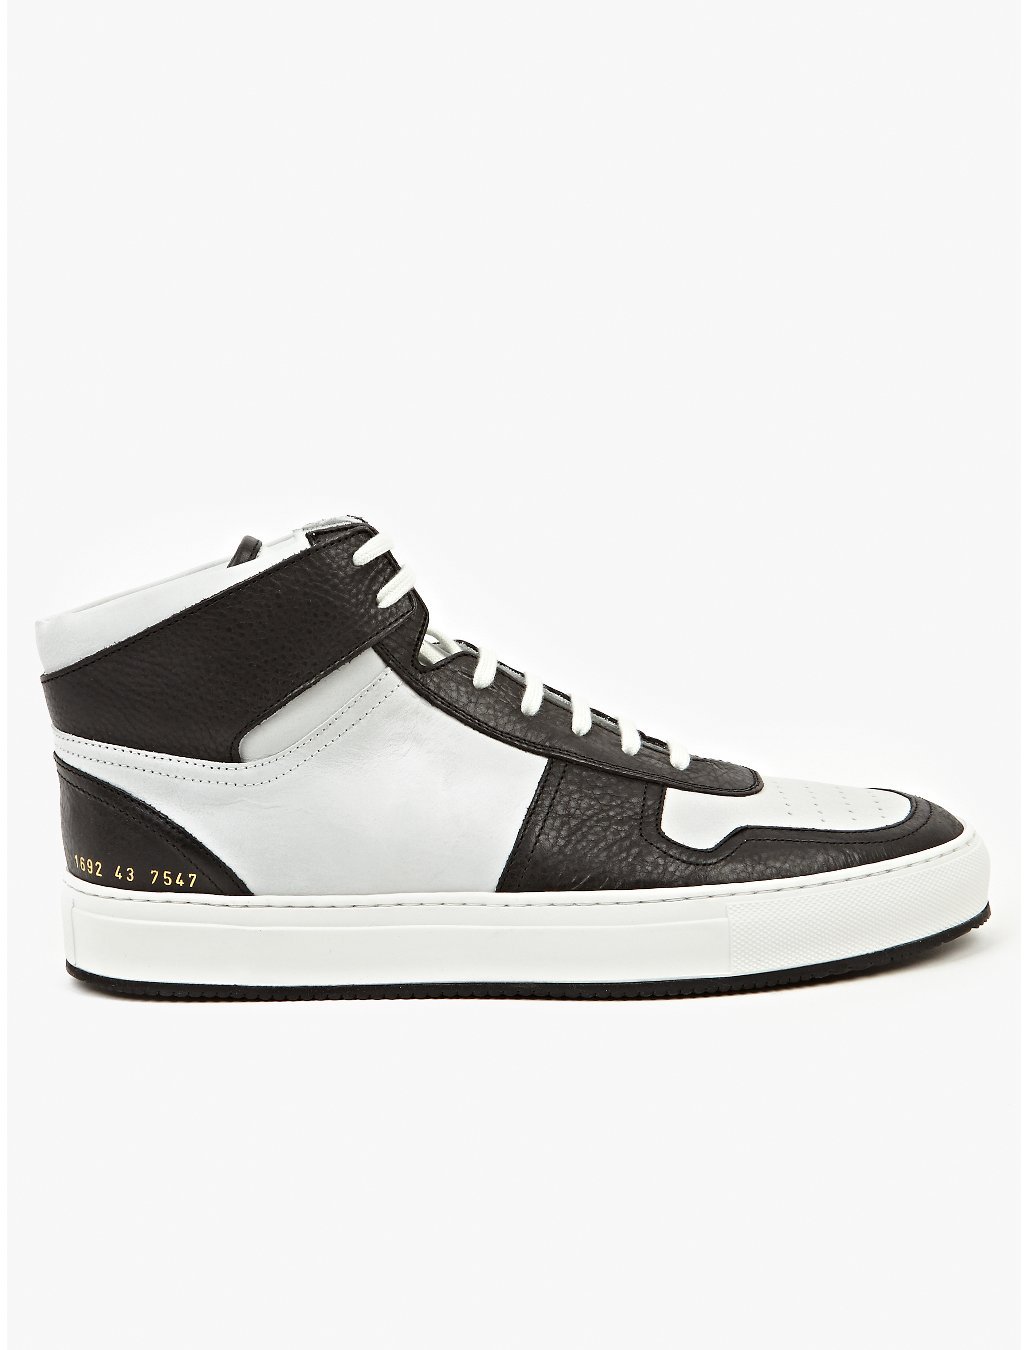 It’s On Sale: Fancy Sneakers – Put This On